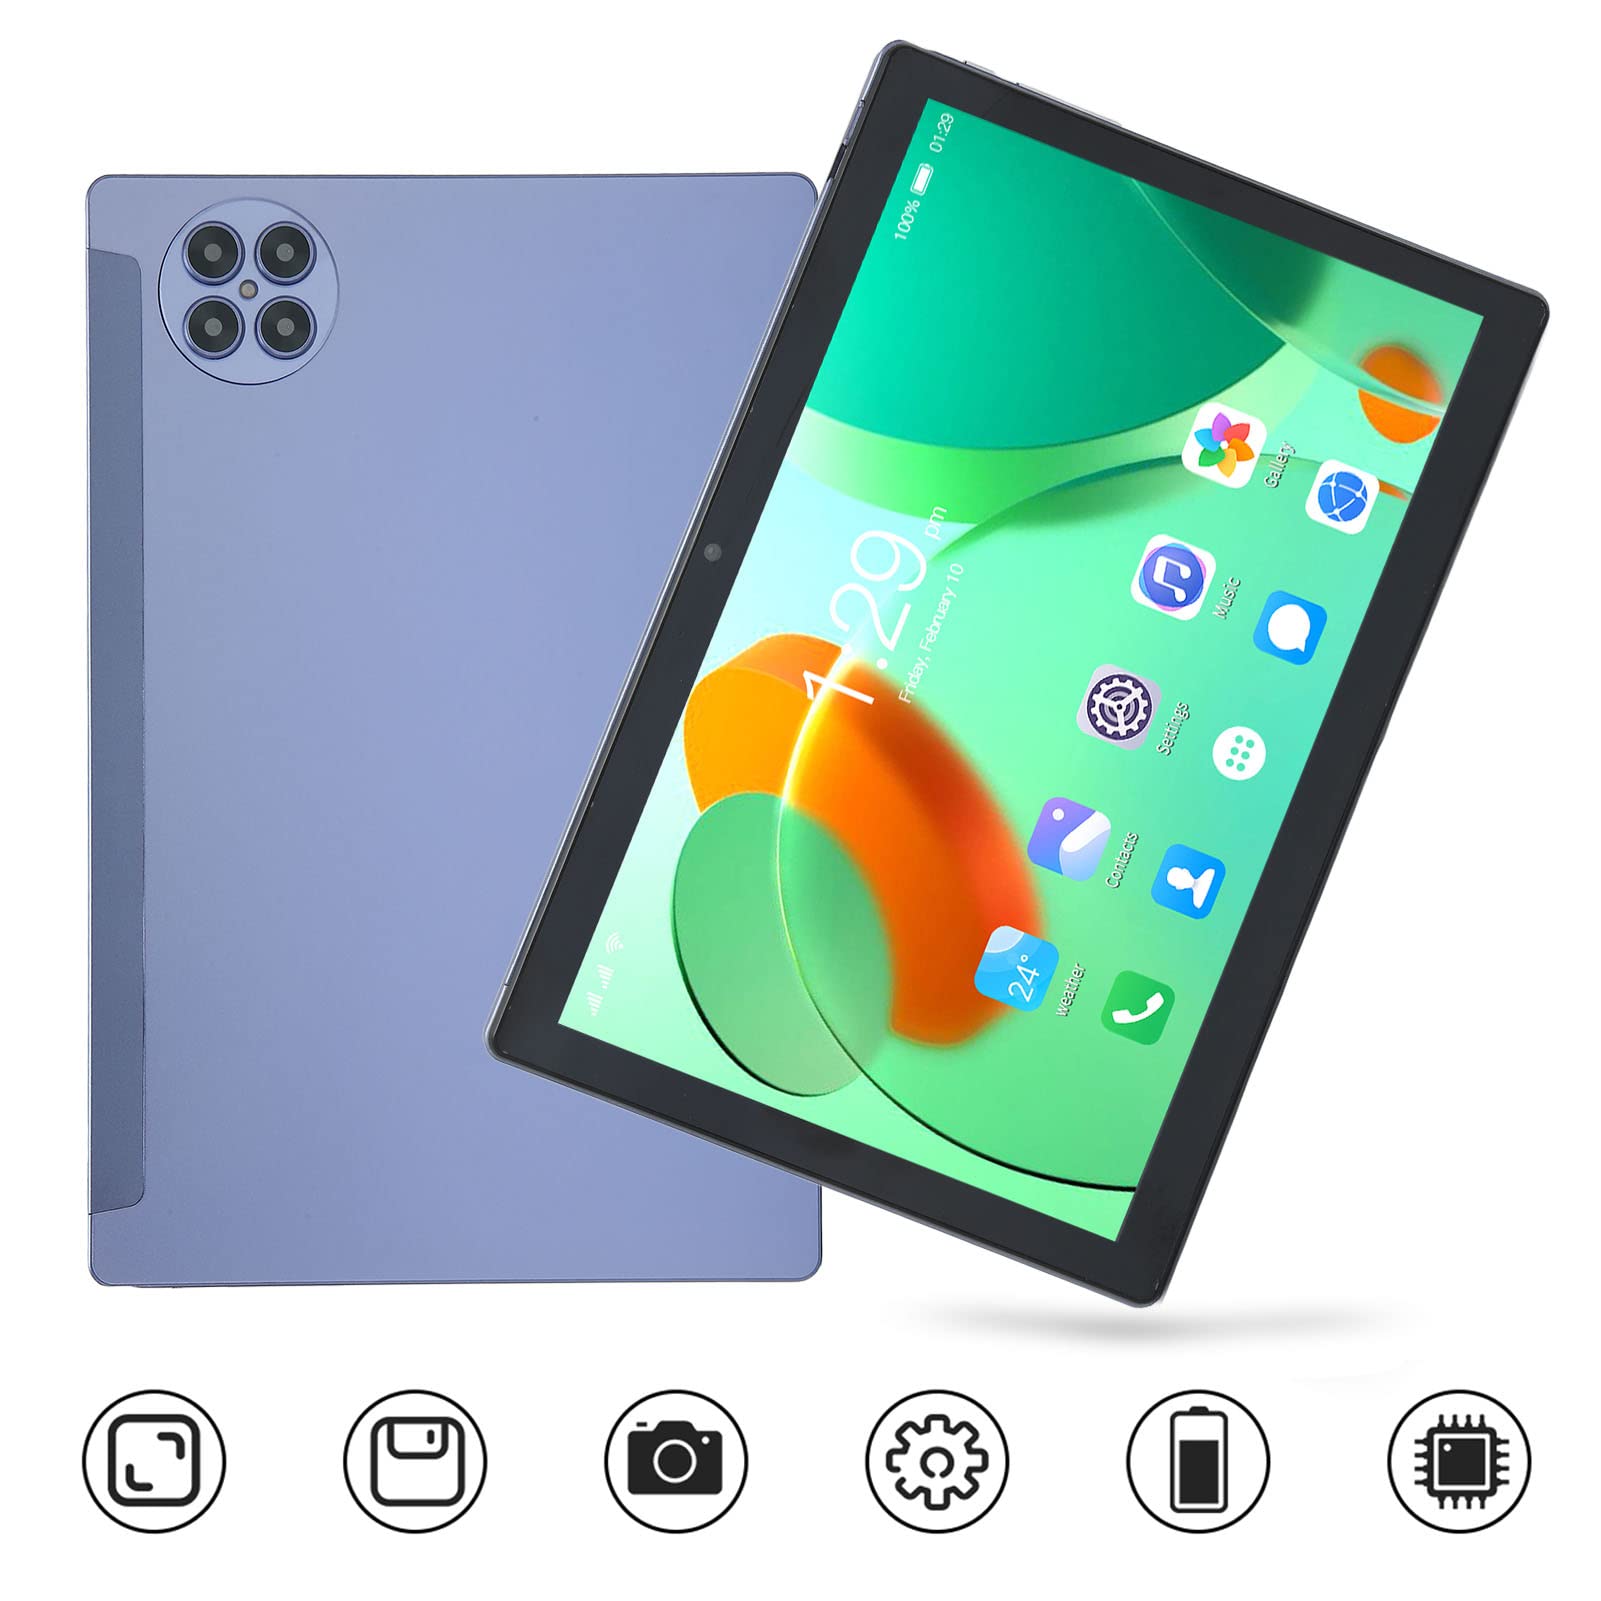 Pomya 10.1 Inch FHD Tablet, 5G WiFi Tablet for Android12, 8GB RAM 256GB ROM, 4G LTE Calling Tablet with 8MP 16MP Camera, 7000mAh Type C Octa Core Tablet for Daily Life